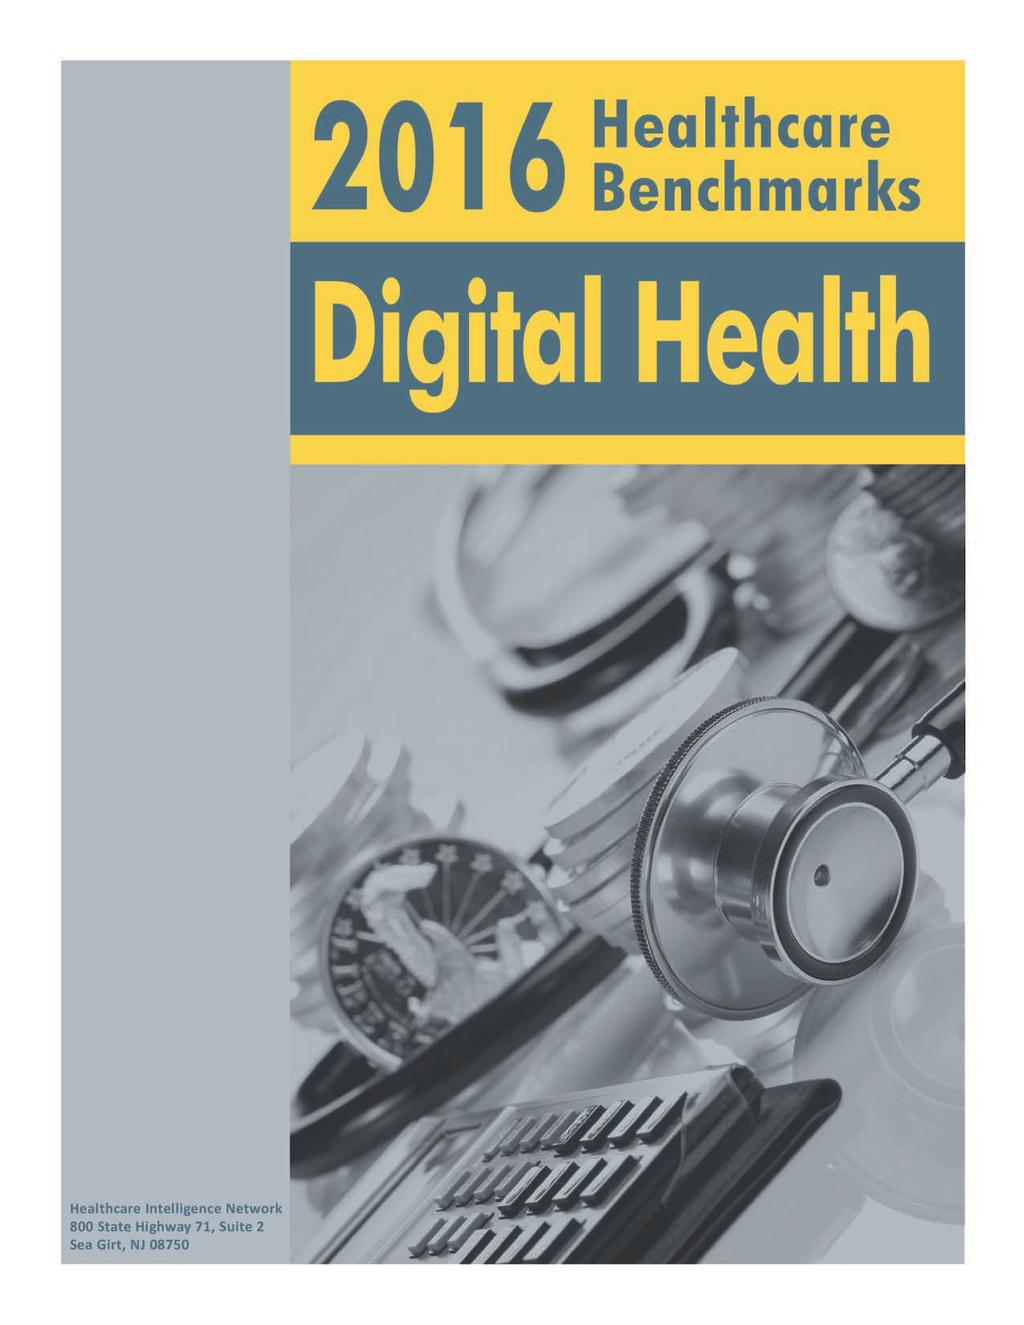 Note: This is an authorized excerpt from 2016 Healthcare Benchmarks: Digital Health To